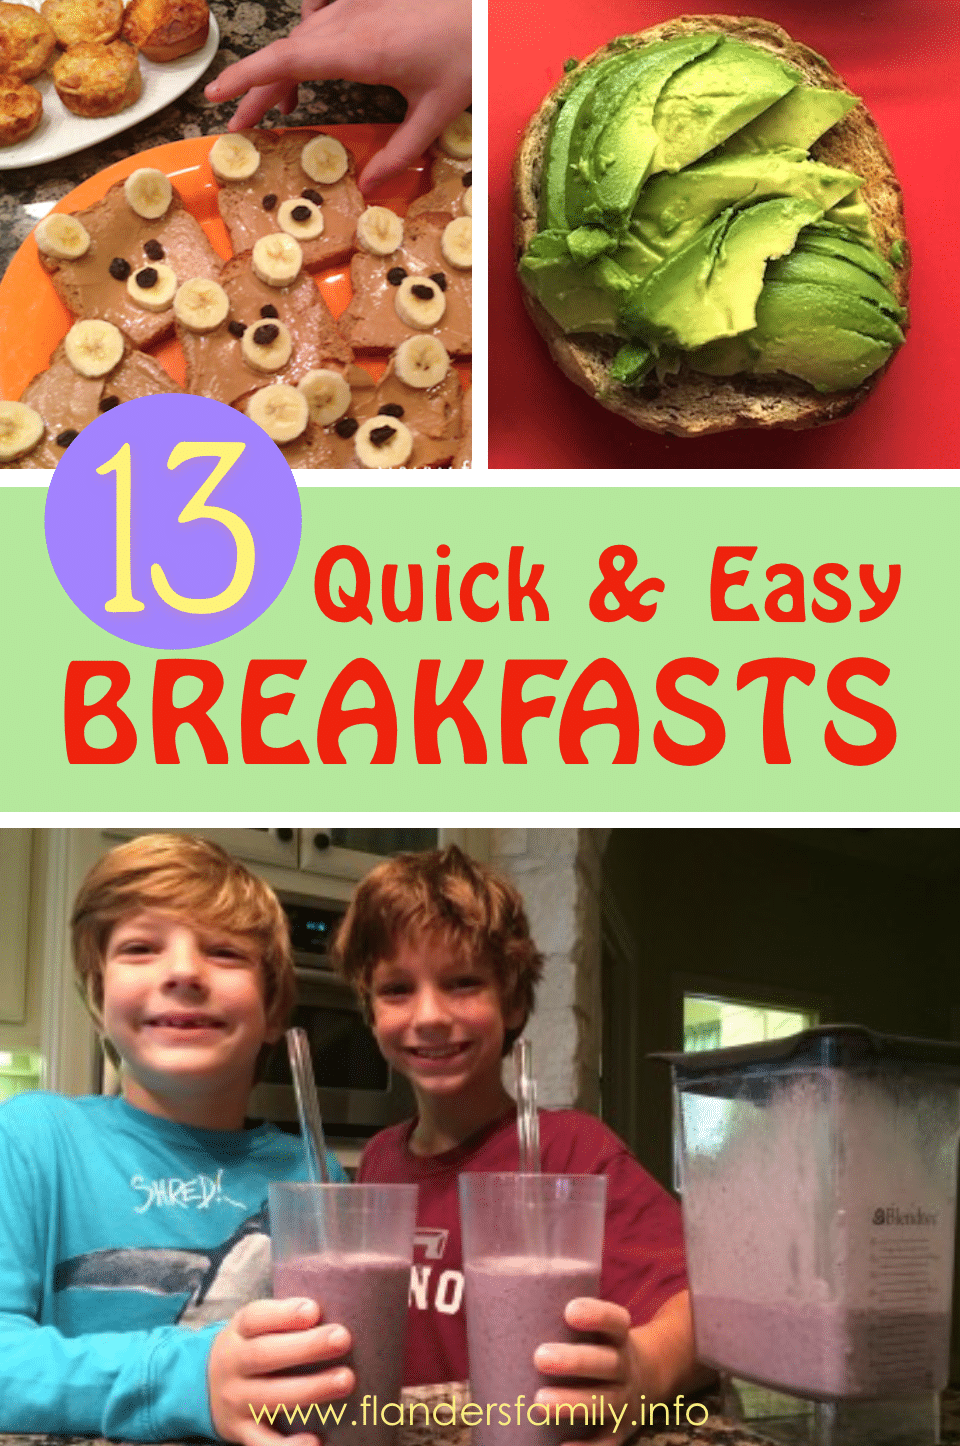 13 Quick & Easy Breakfast Ideas - Flanders Family Homelife